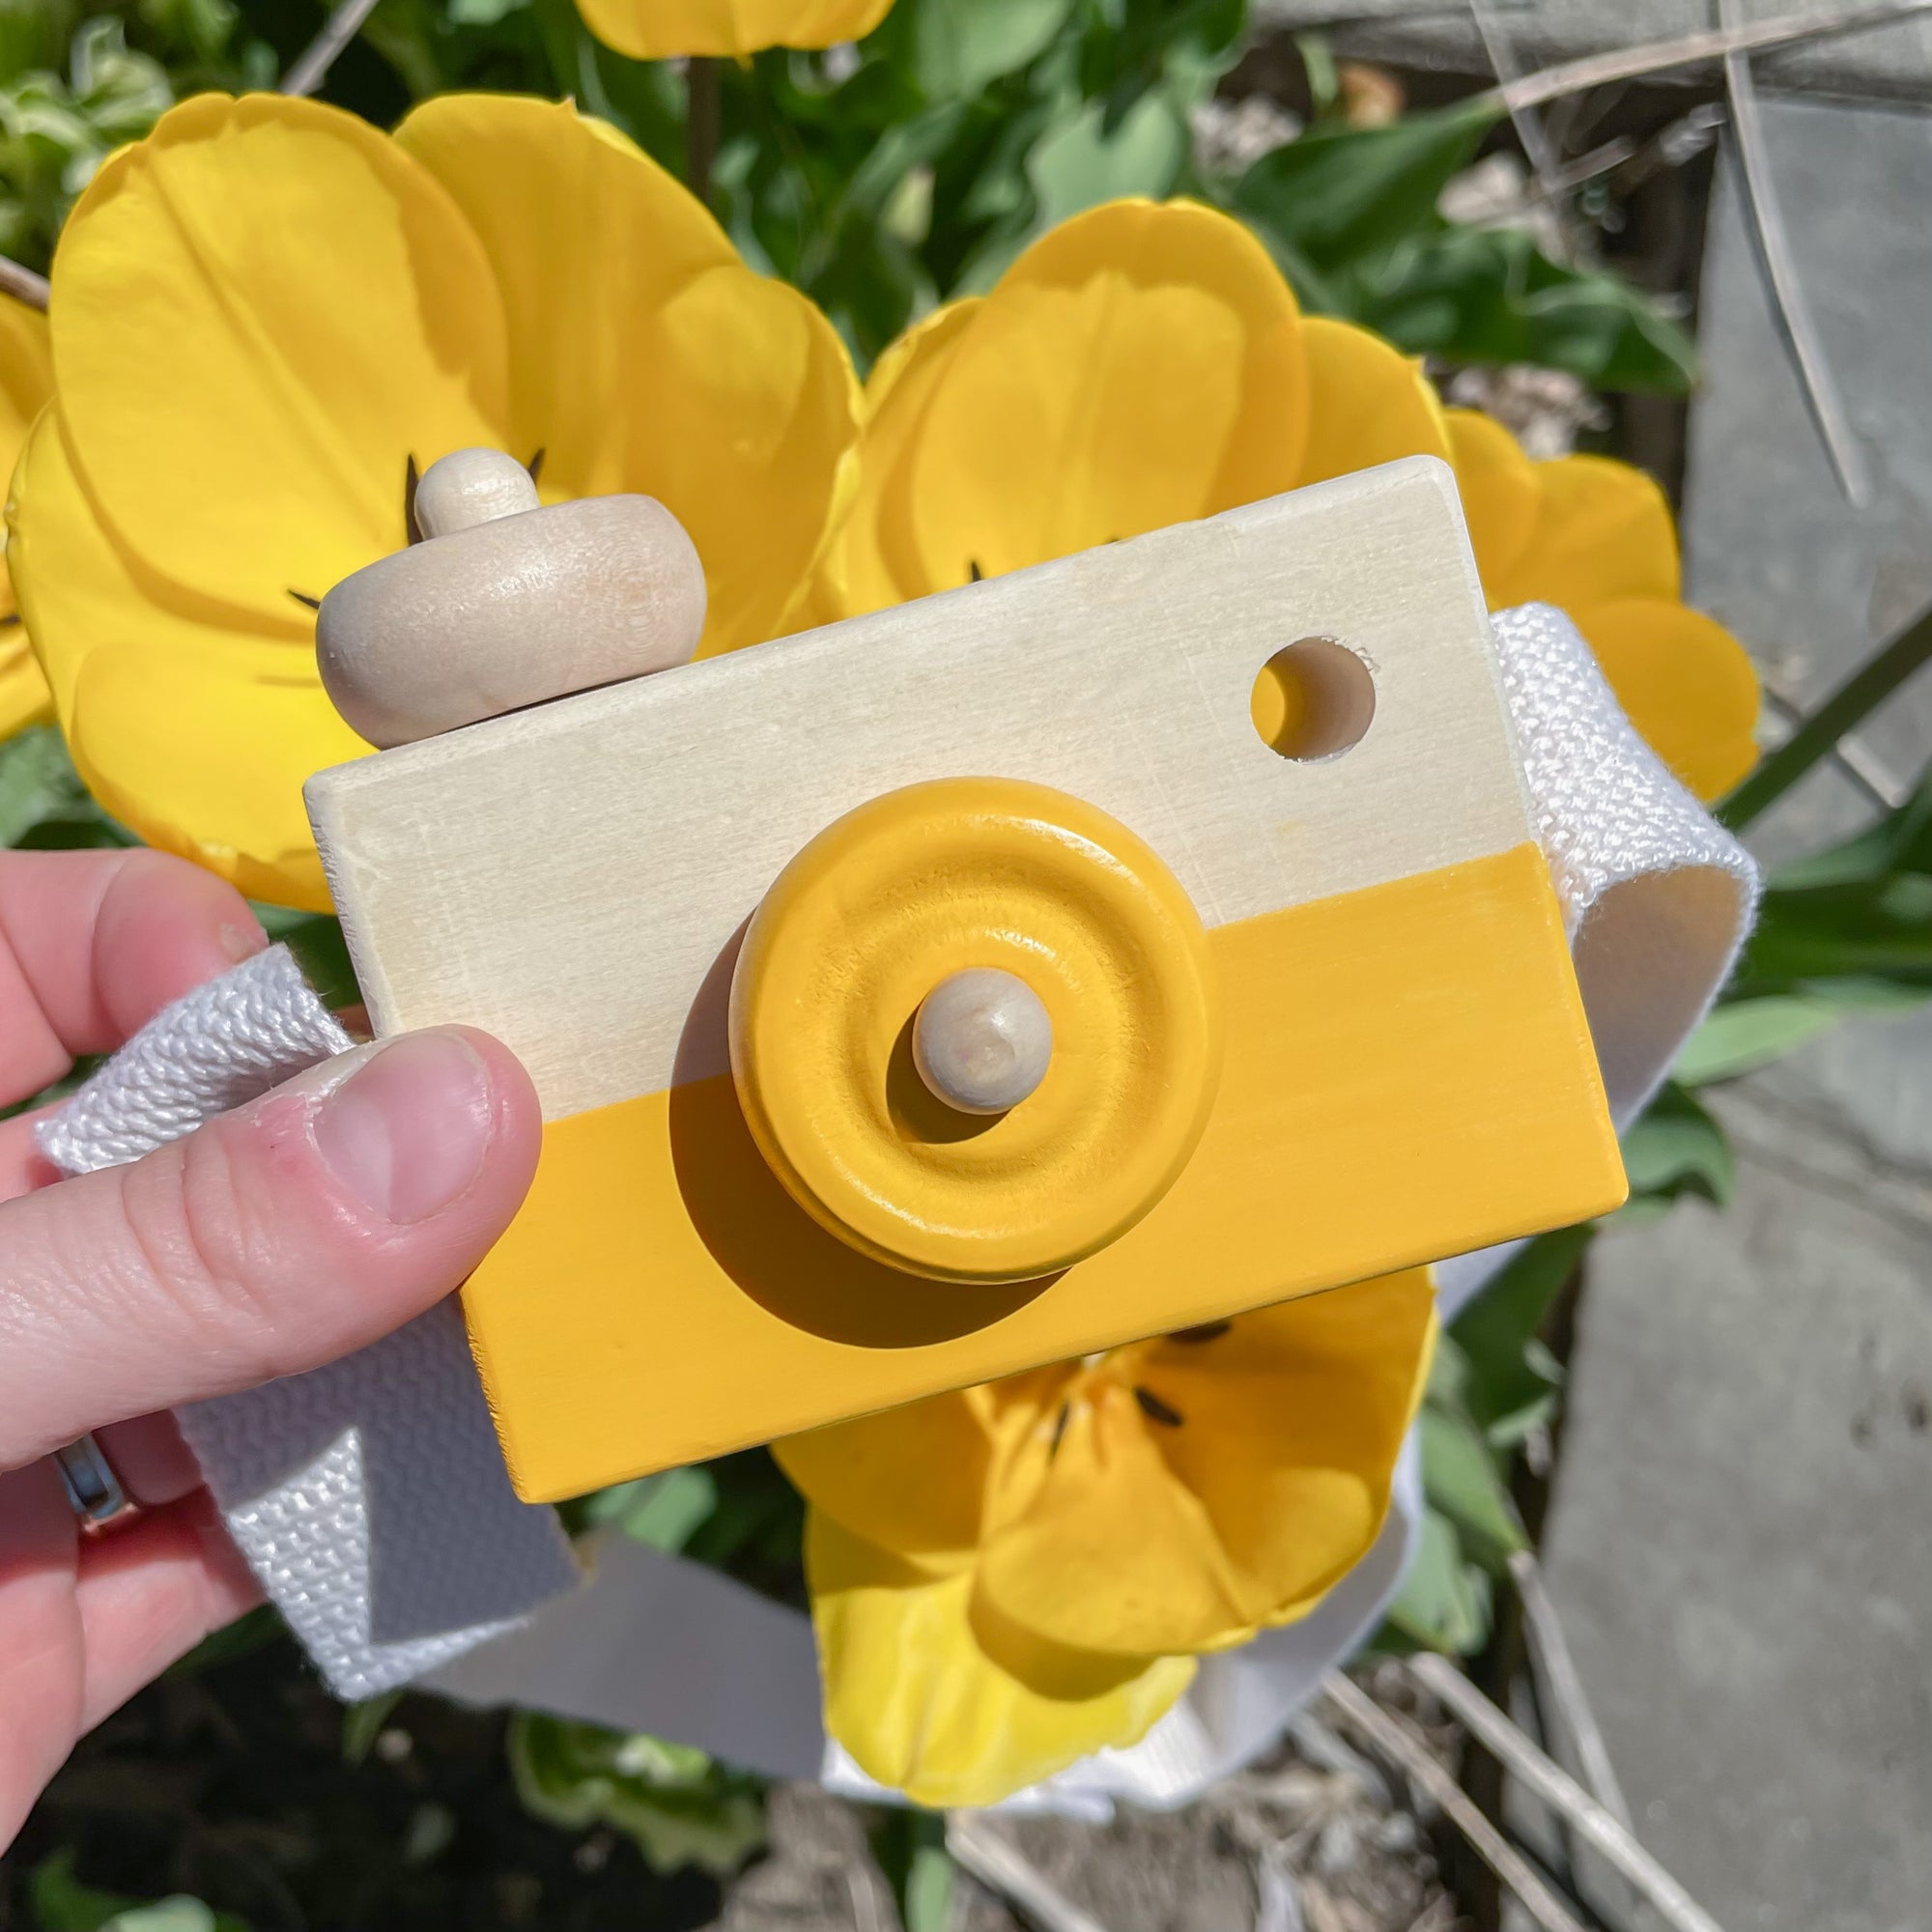 50% OFF! Wooden Camera Toy